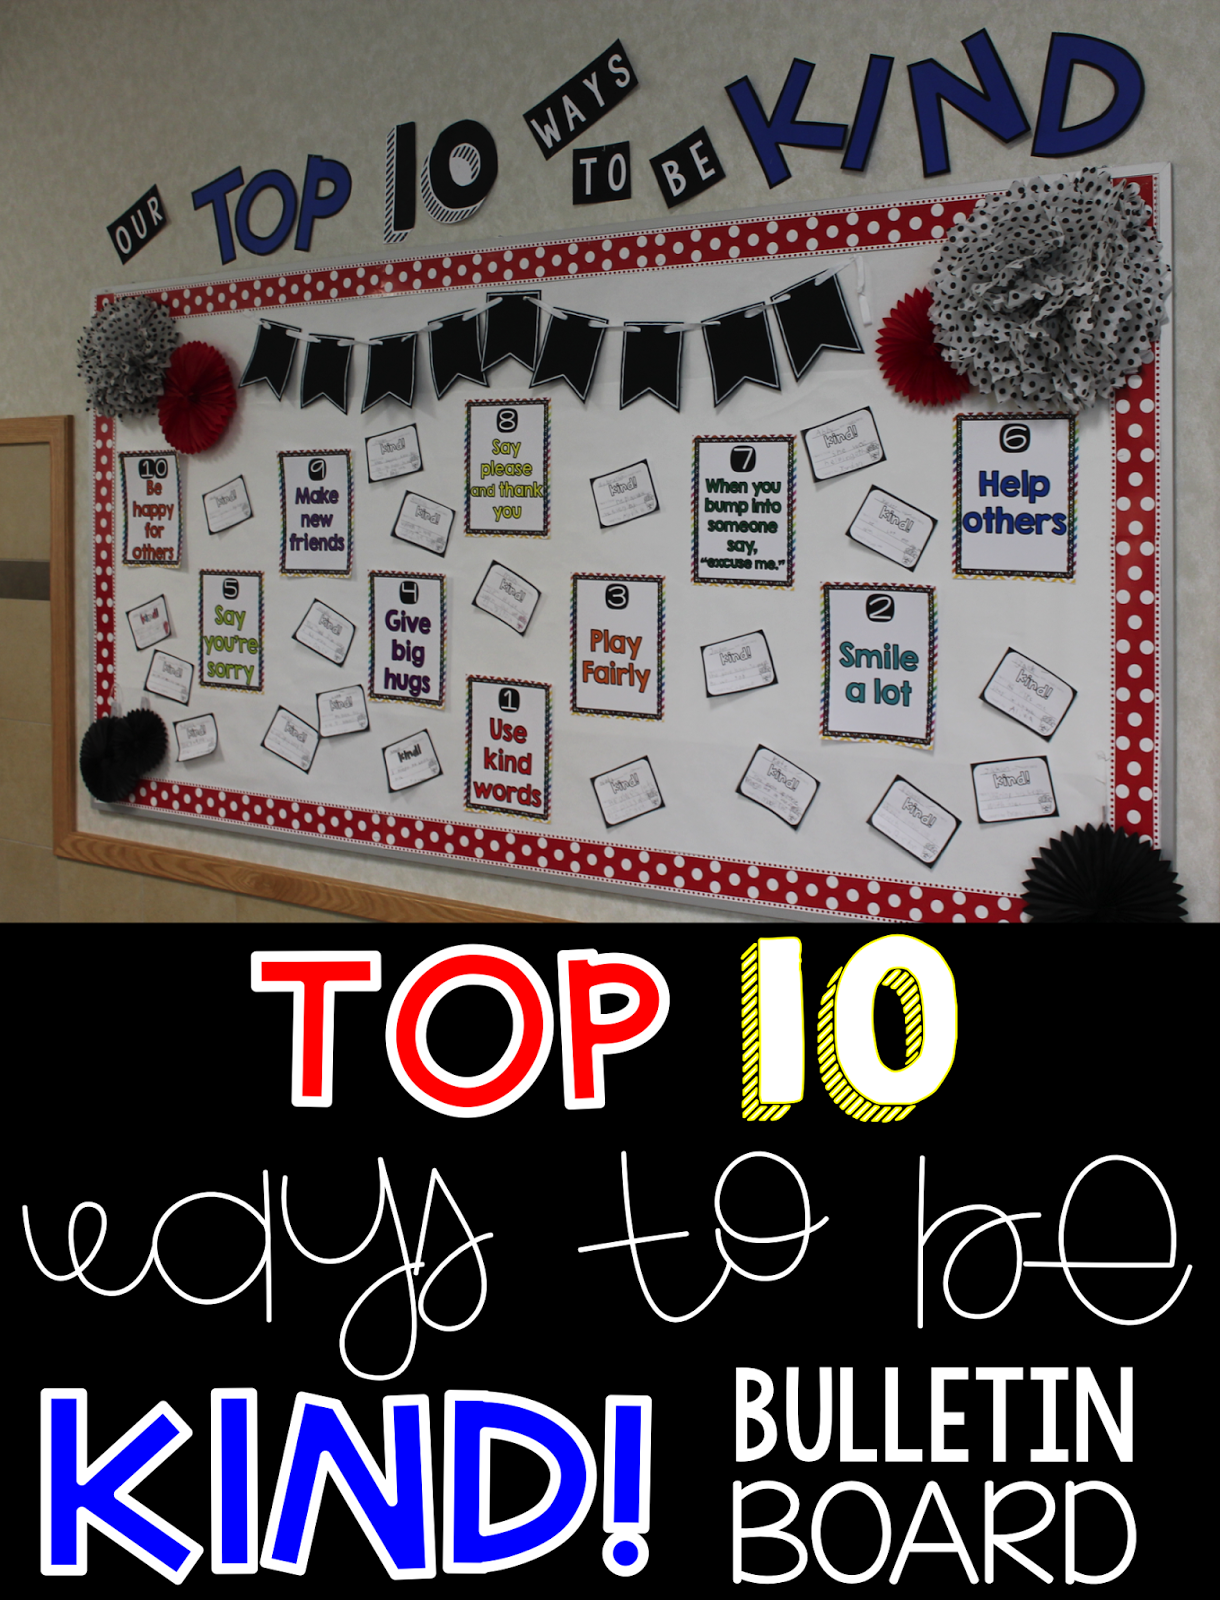 Top 10 Ways to Be Kind - A Bulletin Board Display | What the Teacher Wants!  | Bloglovin'